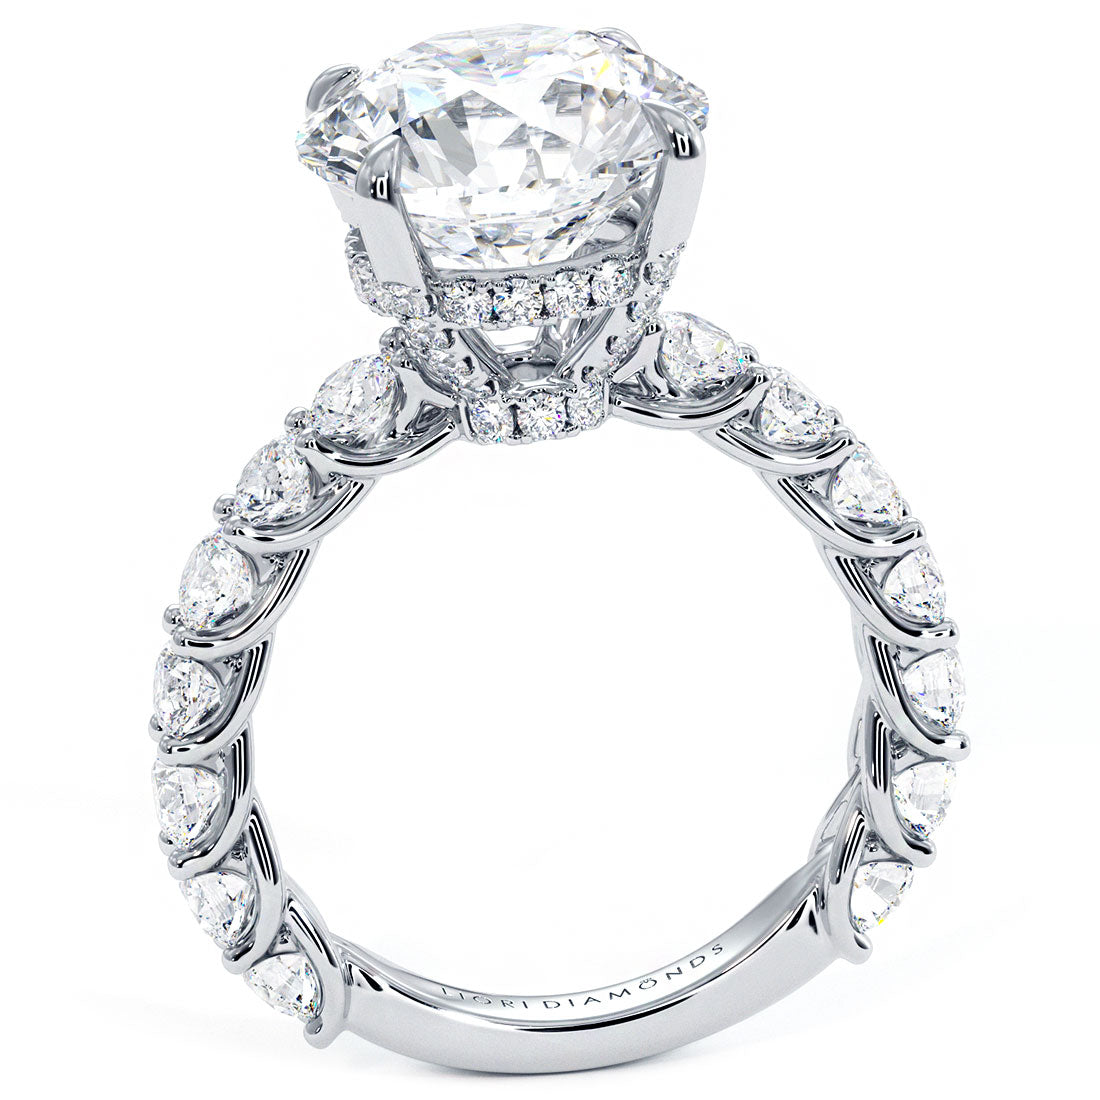 4.52ctw GIA Certified Round Brilliant Lucida set Lab Grown Diamond Engagement Ring set in 14k White Gold